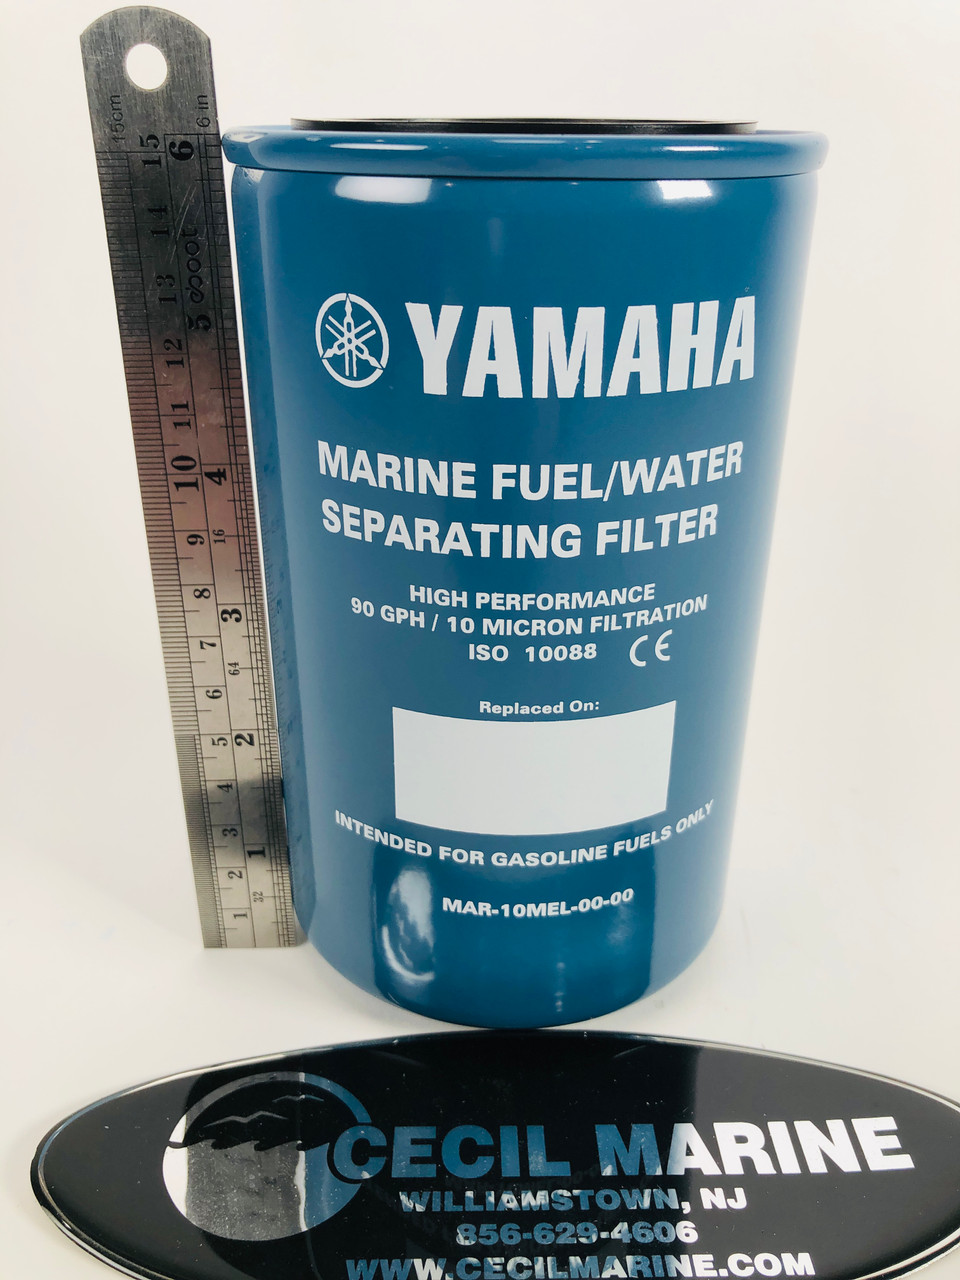 $29.99* GENUINE YAMAHA no tax* 10 MICRON FUEL FILTER / WATER SEPARATOR MAR-10MEL-00-00 *In Stock & Ready To Ship!